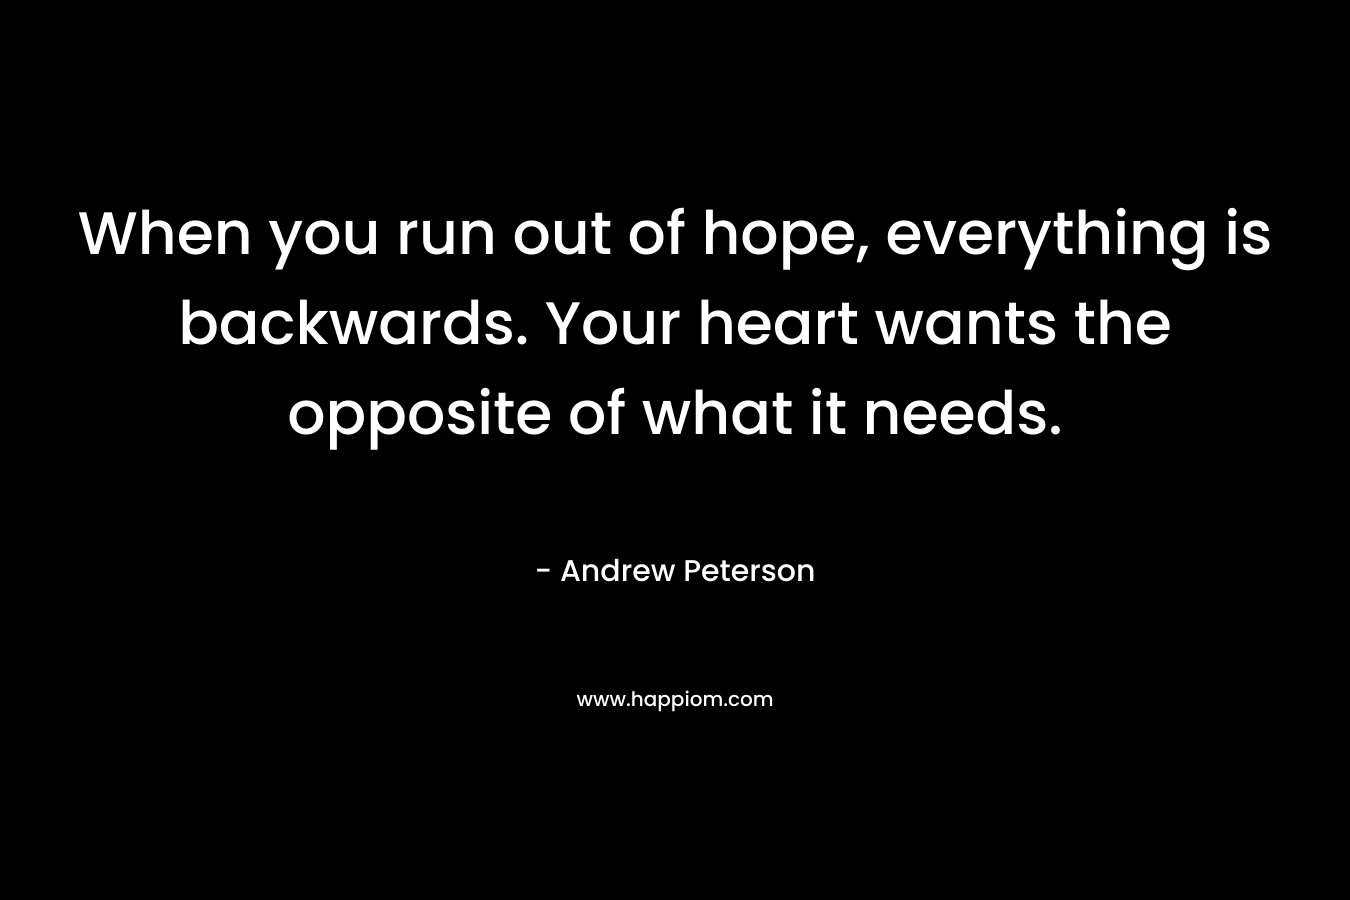 When you run out of hope, everything is backwards. Your heart wants the opposite of what it needs.